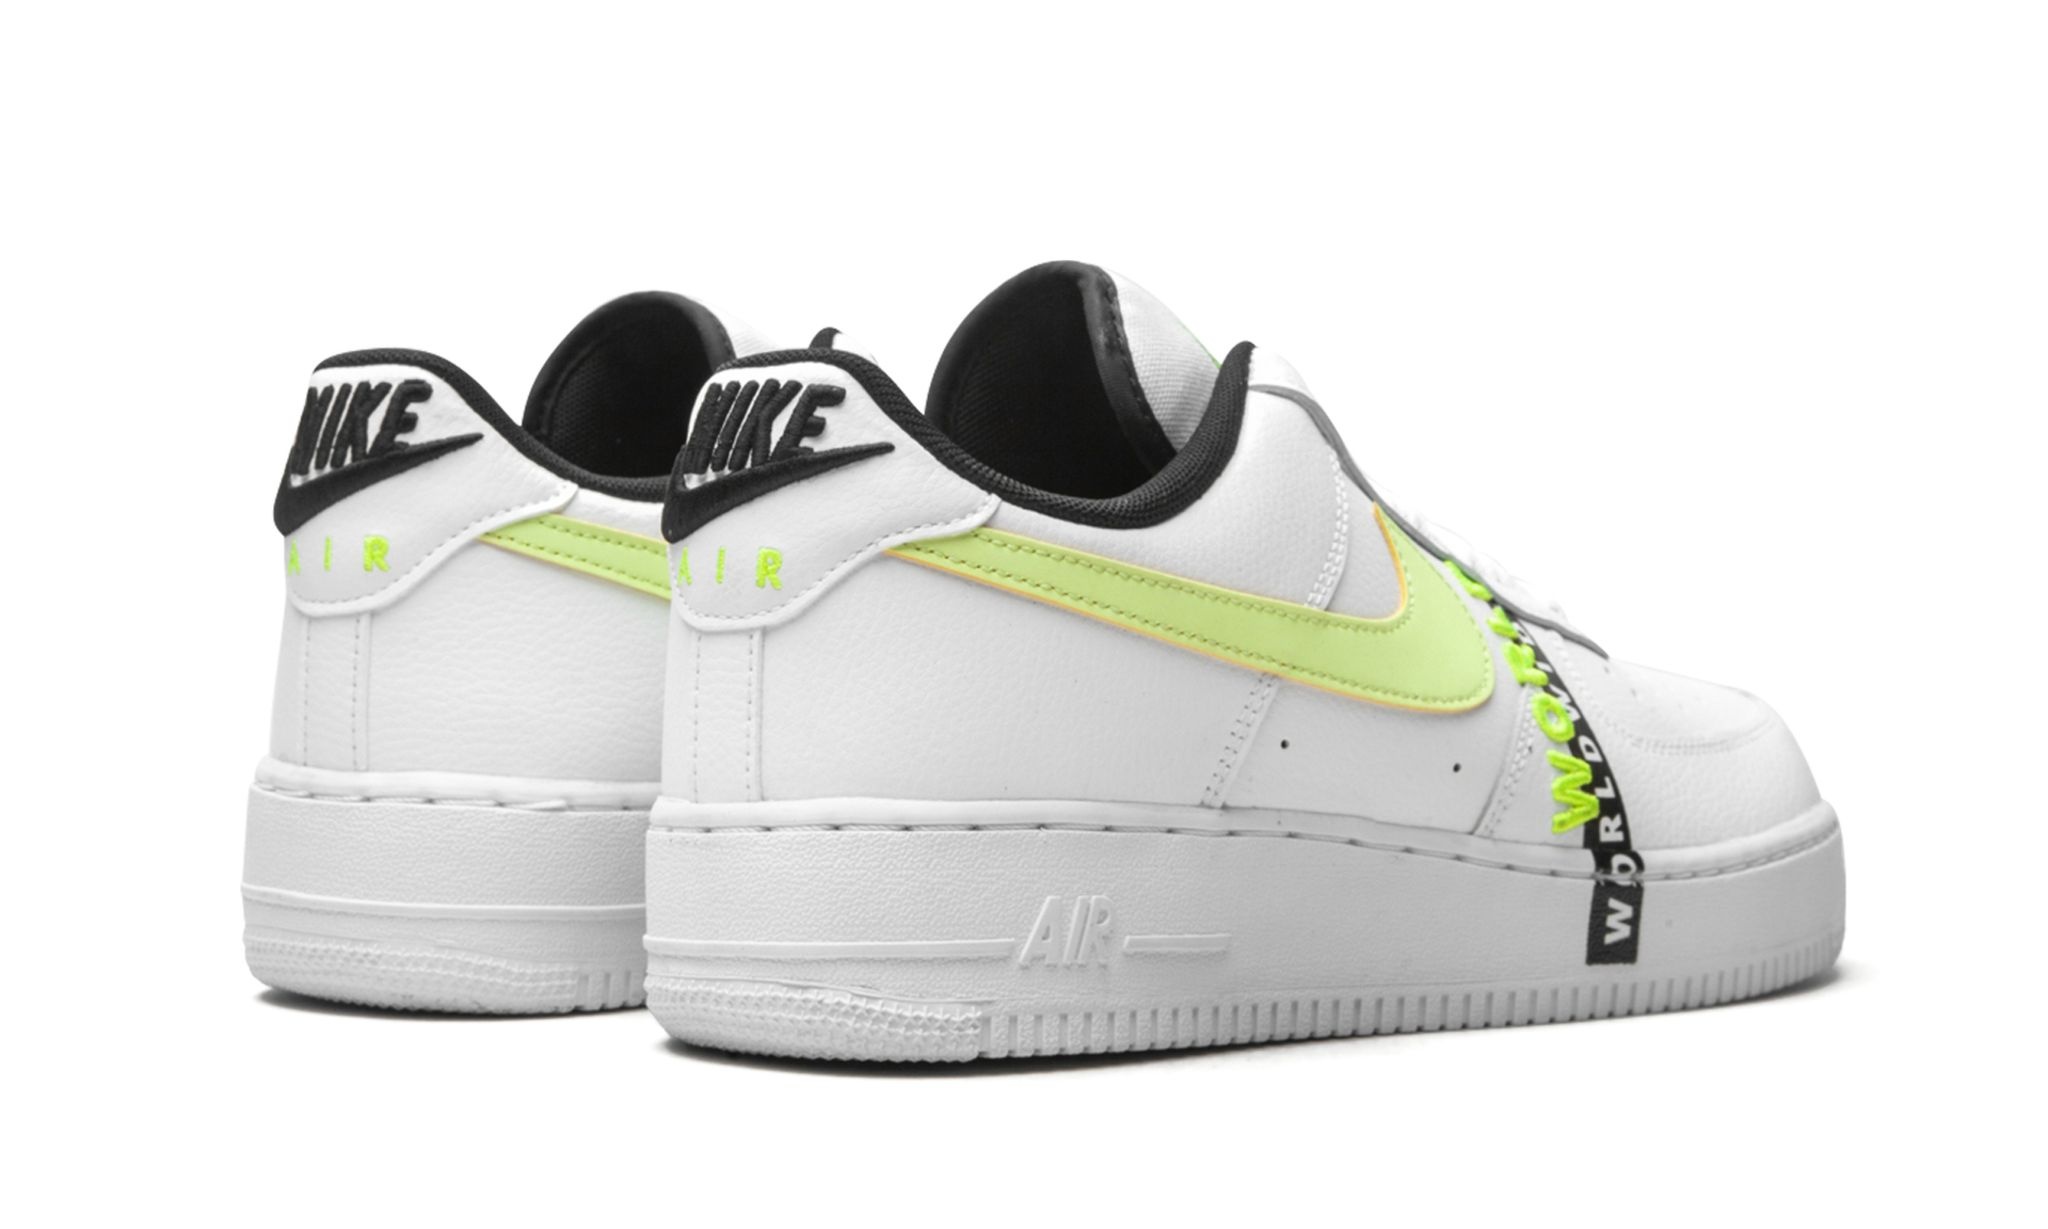 Air Force 1 Low "Worldwide White Volt" - 3